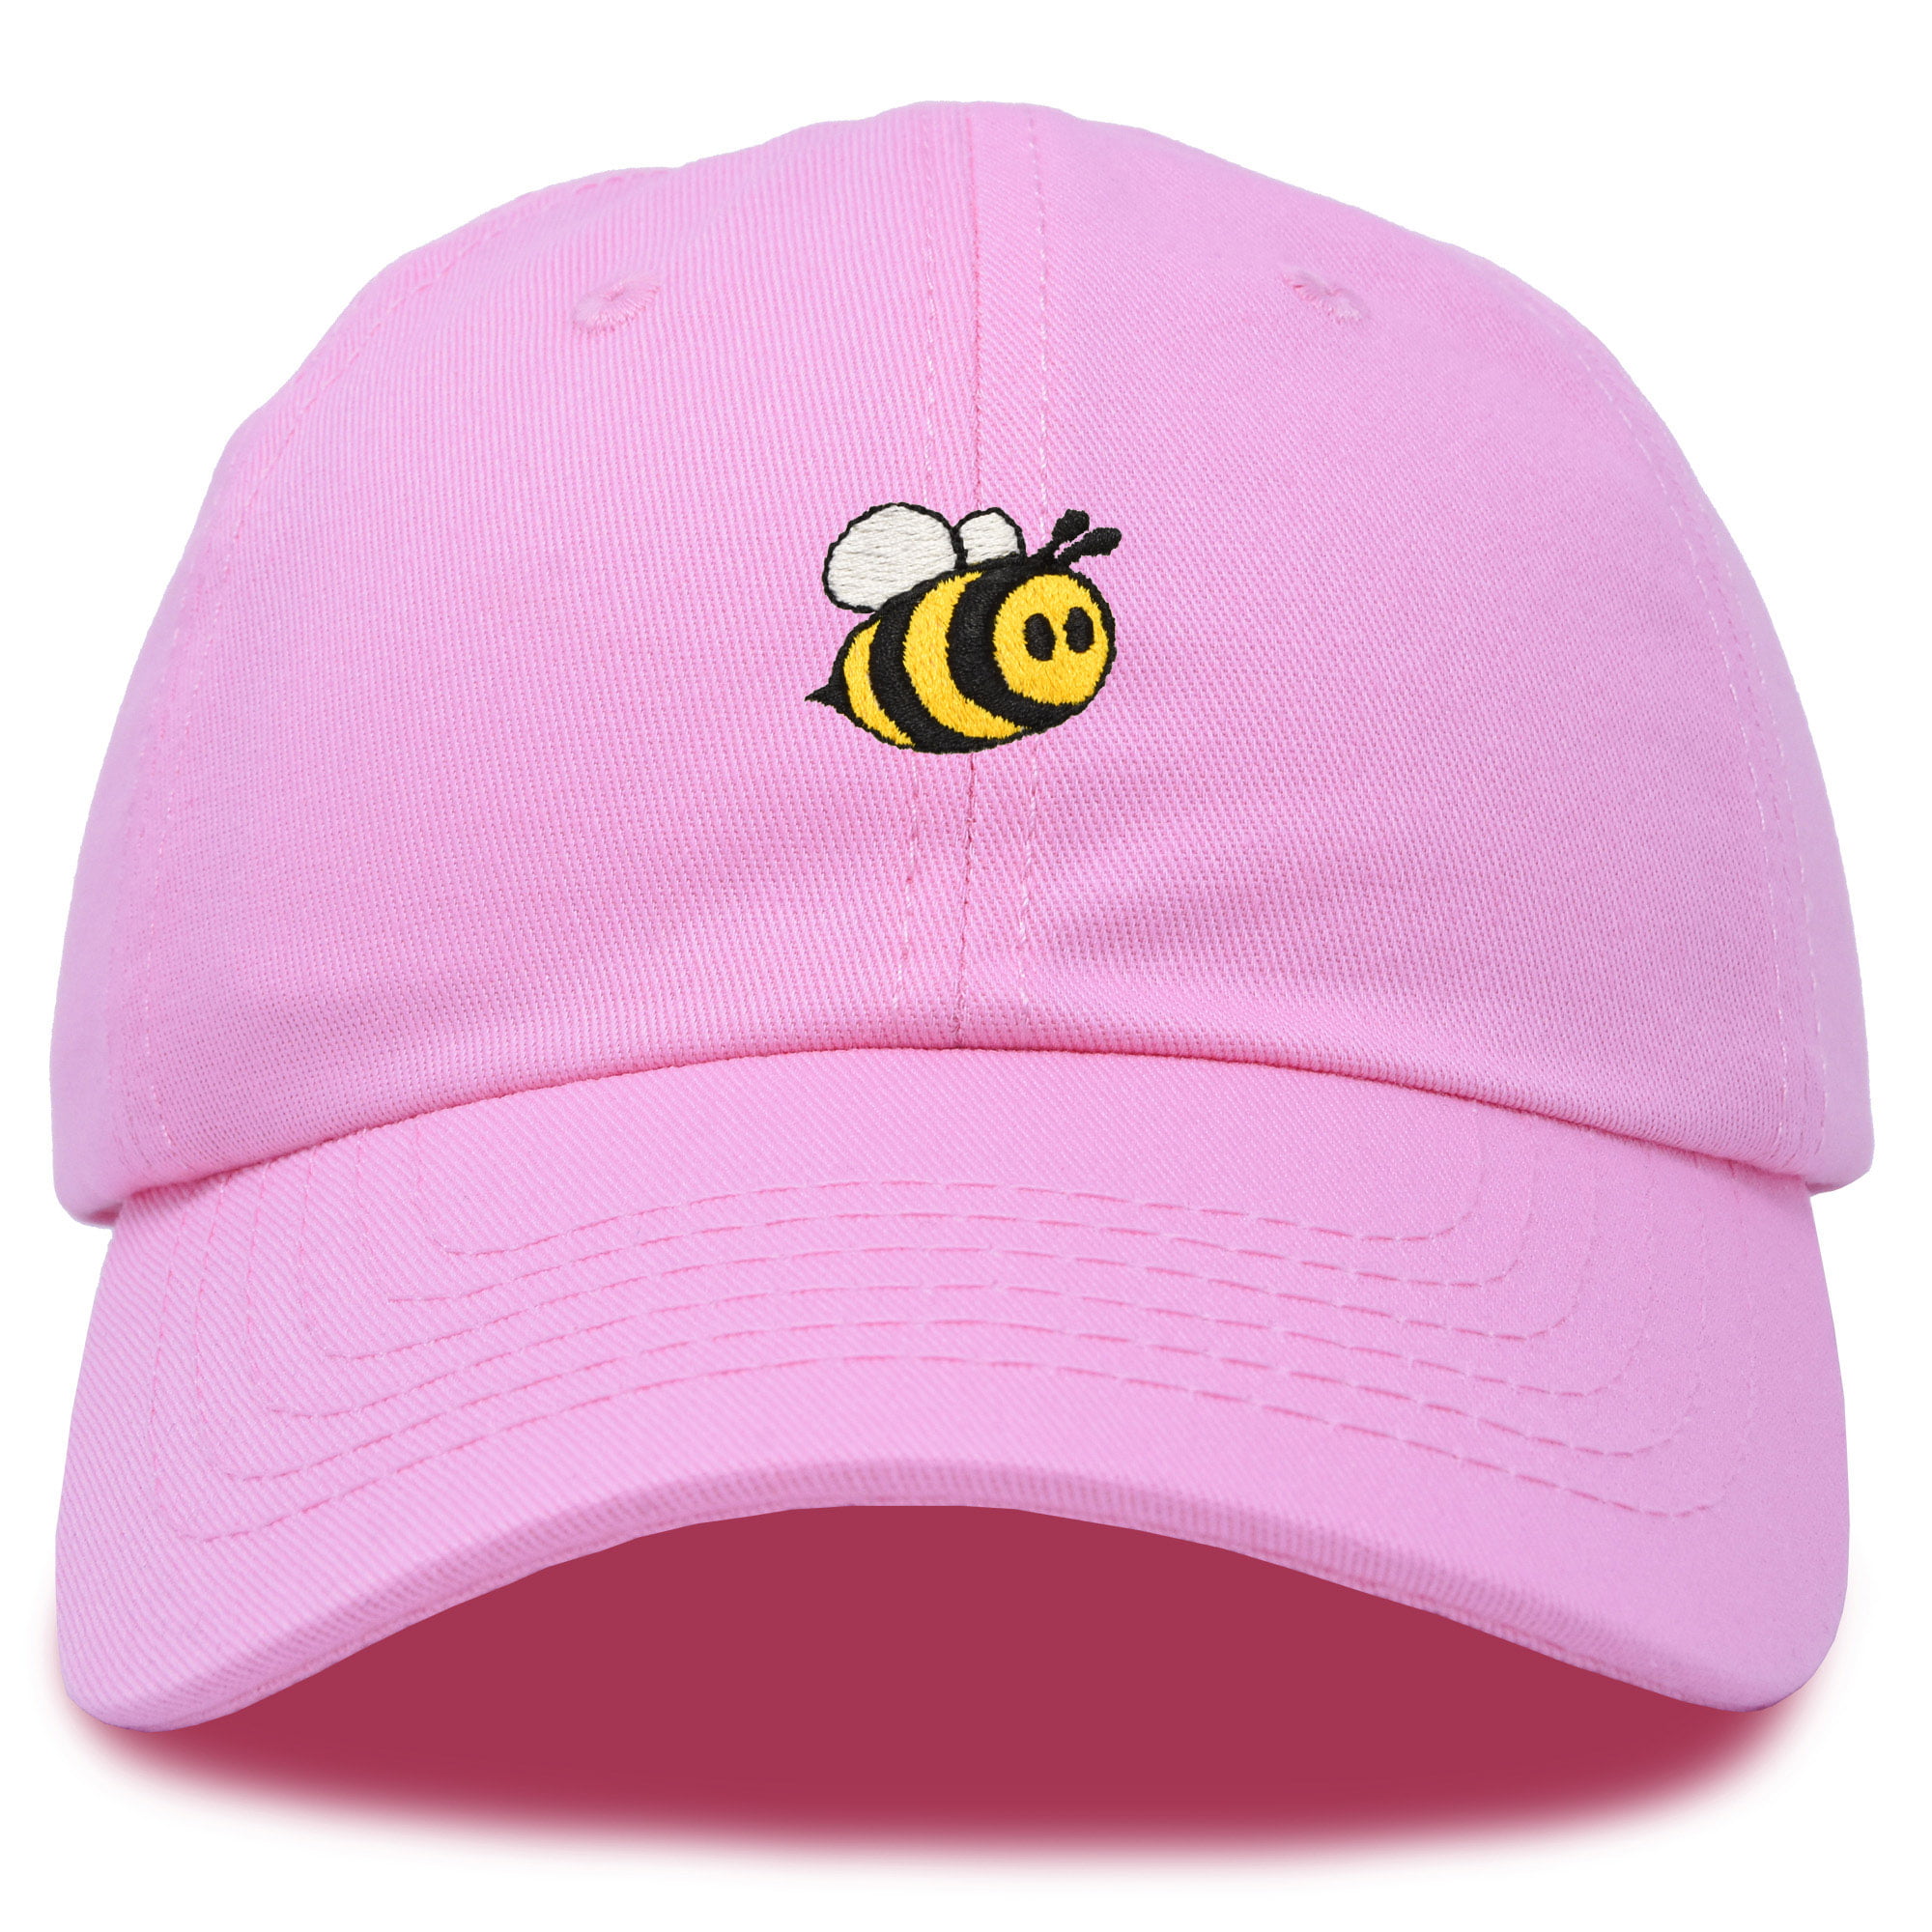 DALIX Bumble Bee Baseball Cap Dad Hat Embroidered Womens Girls in Light ...